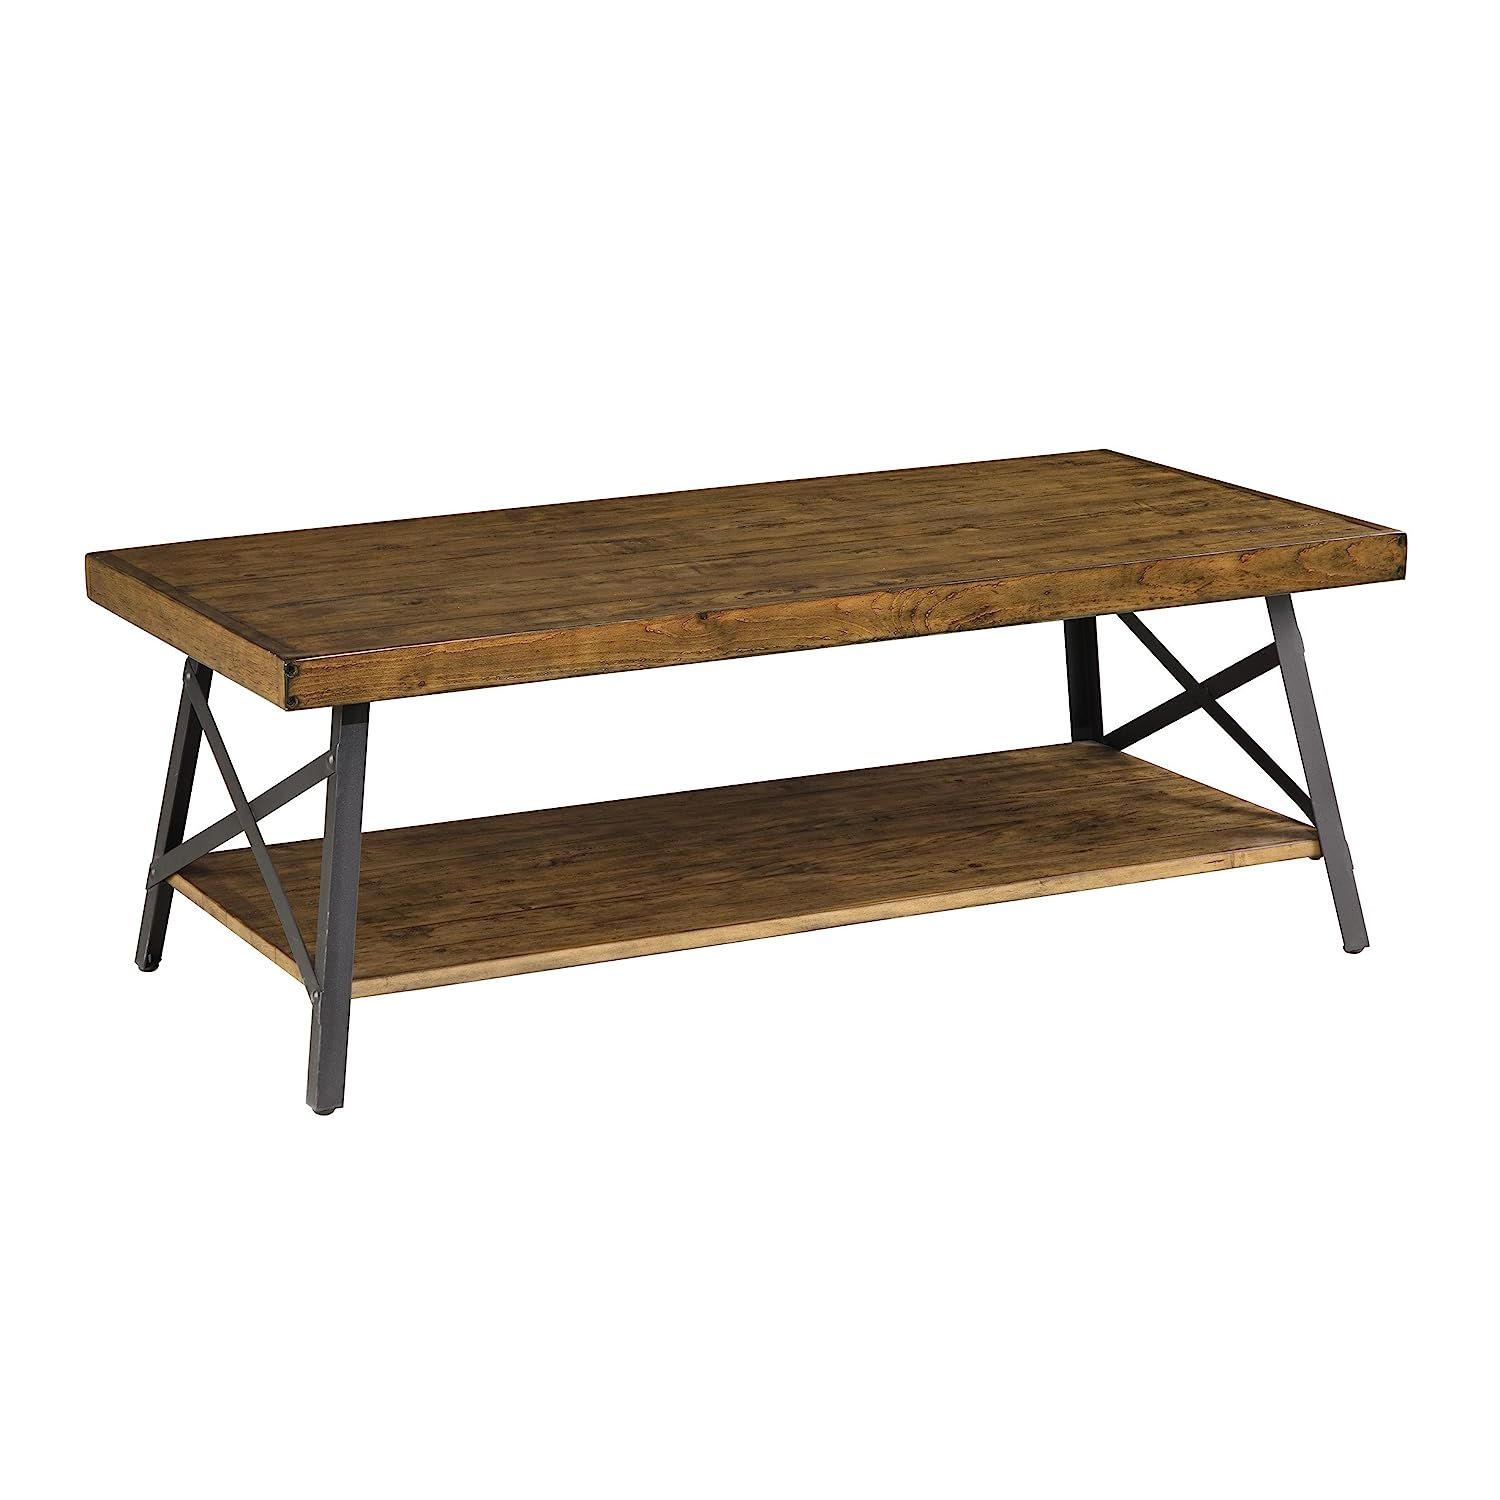 Emerald Home Chandler Rustic Industrial Solid Wood and Steel Coffee Table with Open Shelf | Amazon (US)